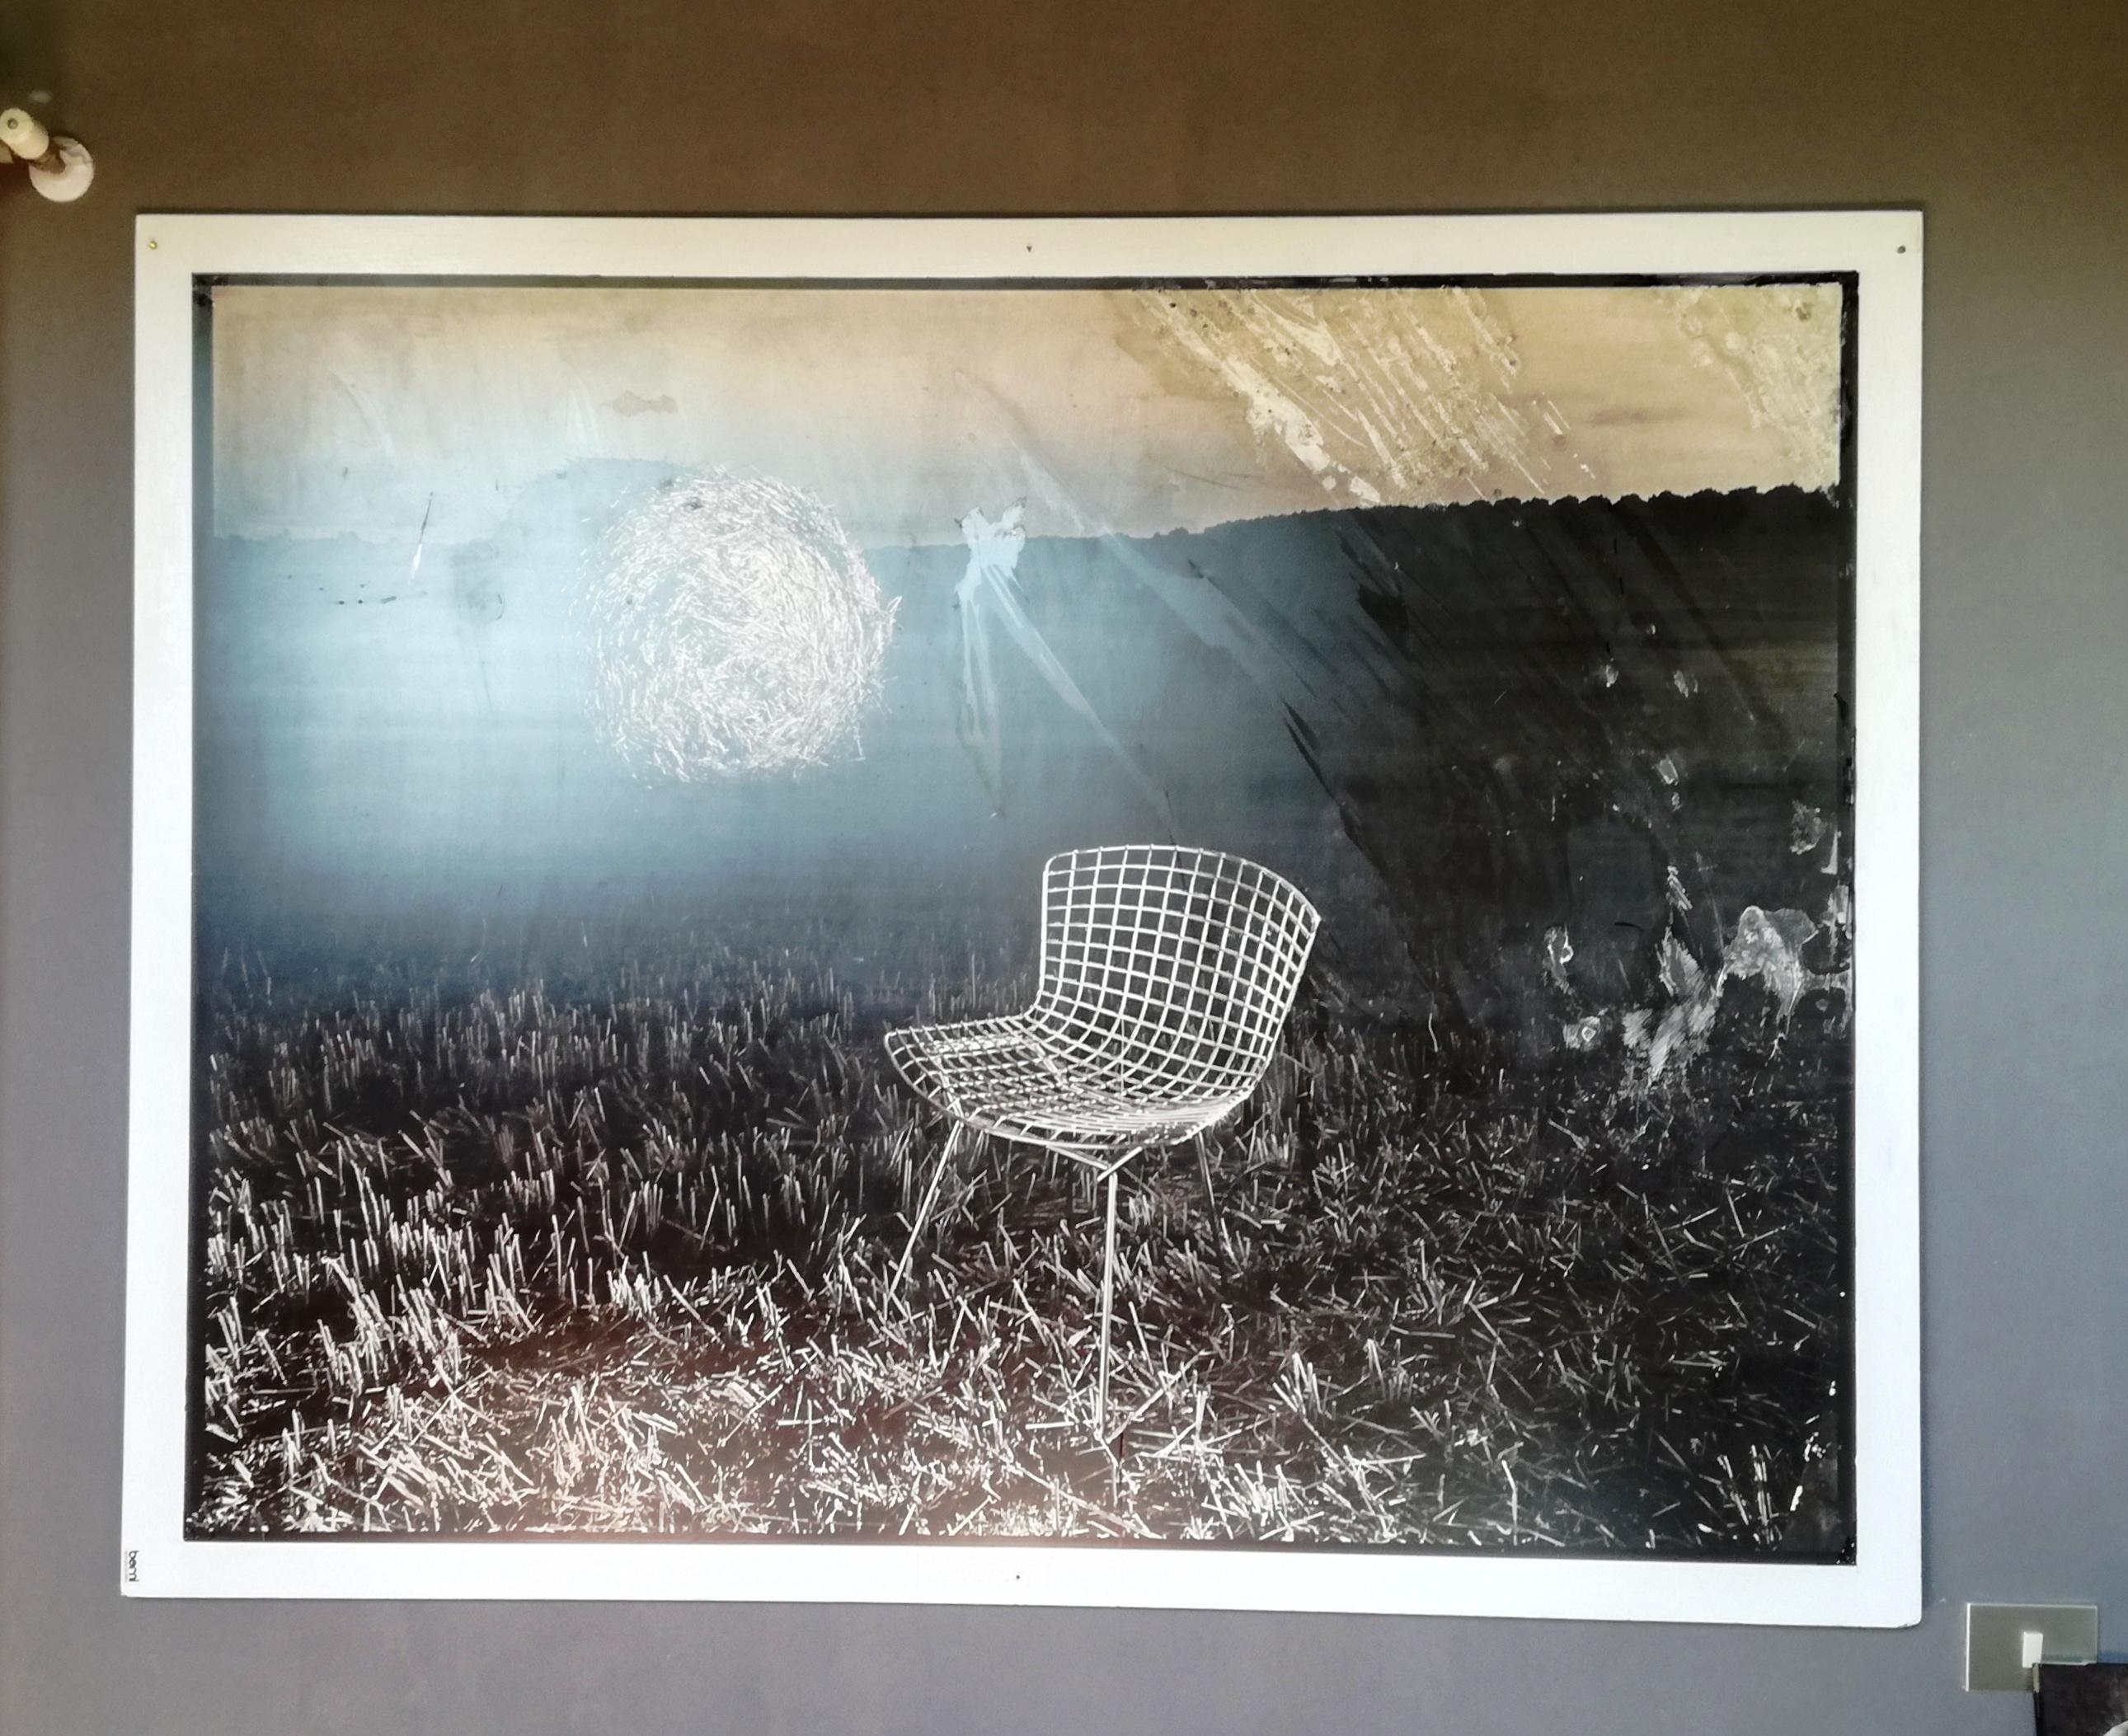 Large print panel of photos by Luigi Bussolati, 1990s. Soggetto sedia Wire Chair di Bertoia. Stampa su forex 4 mm. Part of a group of 8 photographs on design. the surface is weather-marked on the right side.